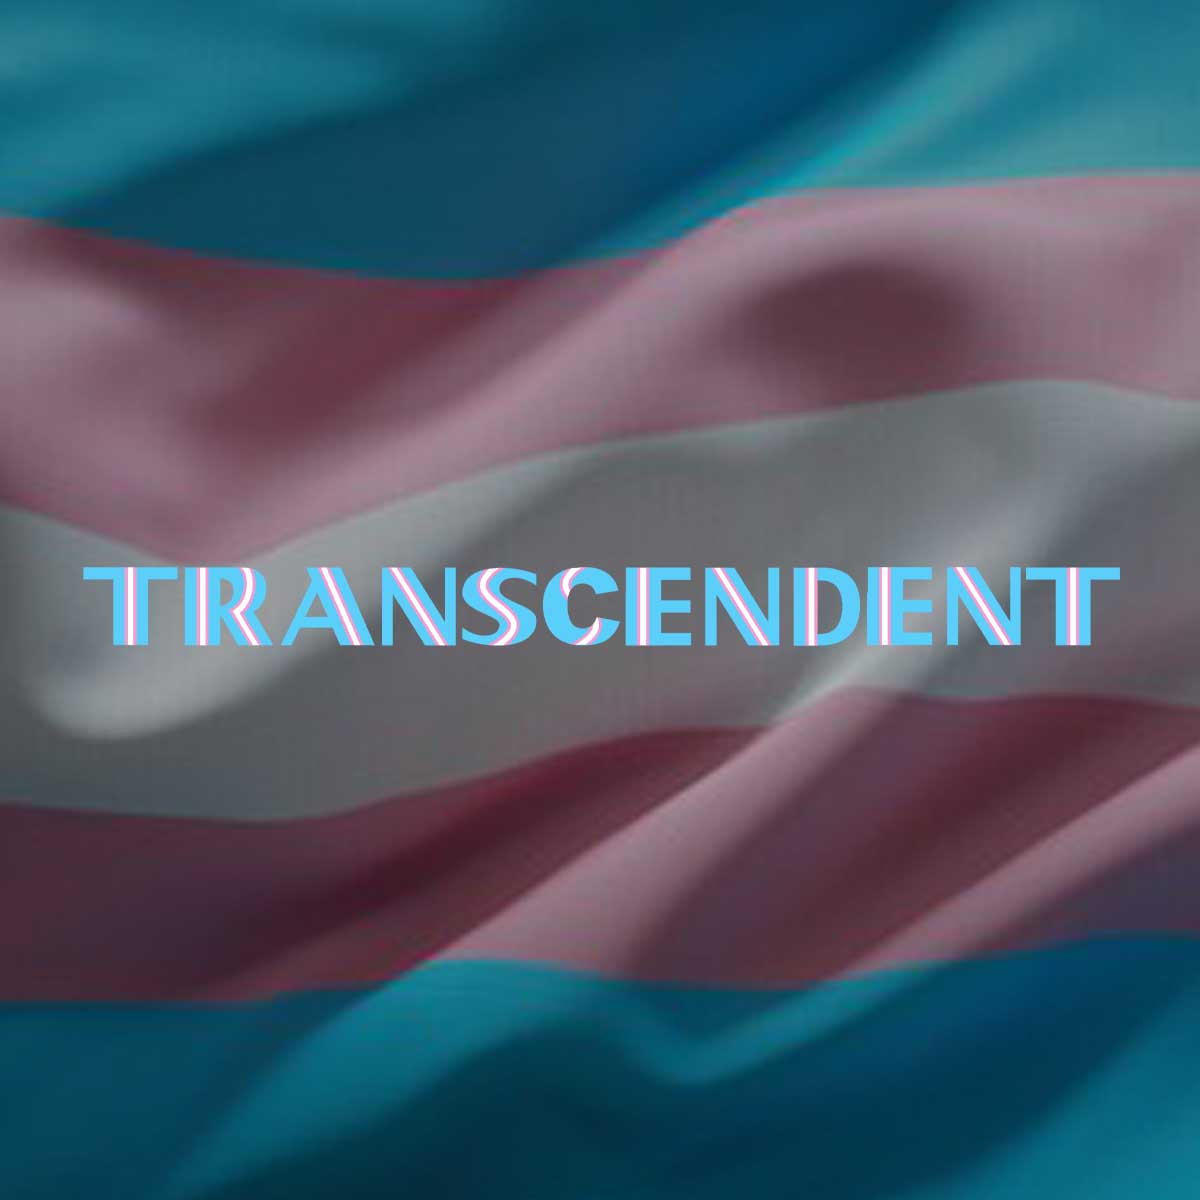 Trans and transcendent!